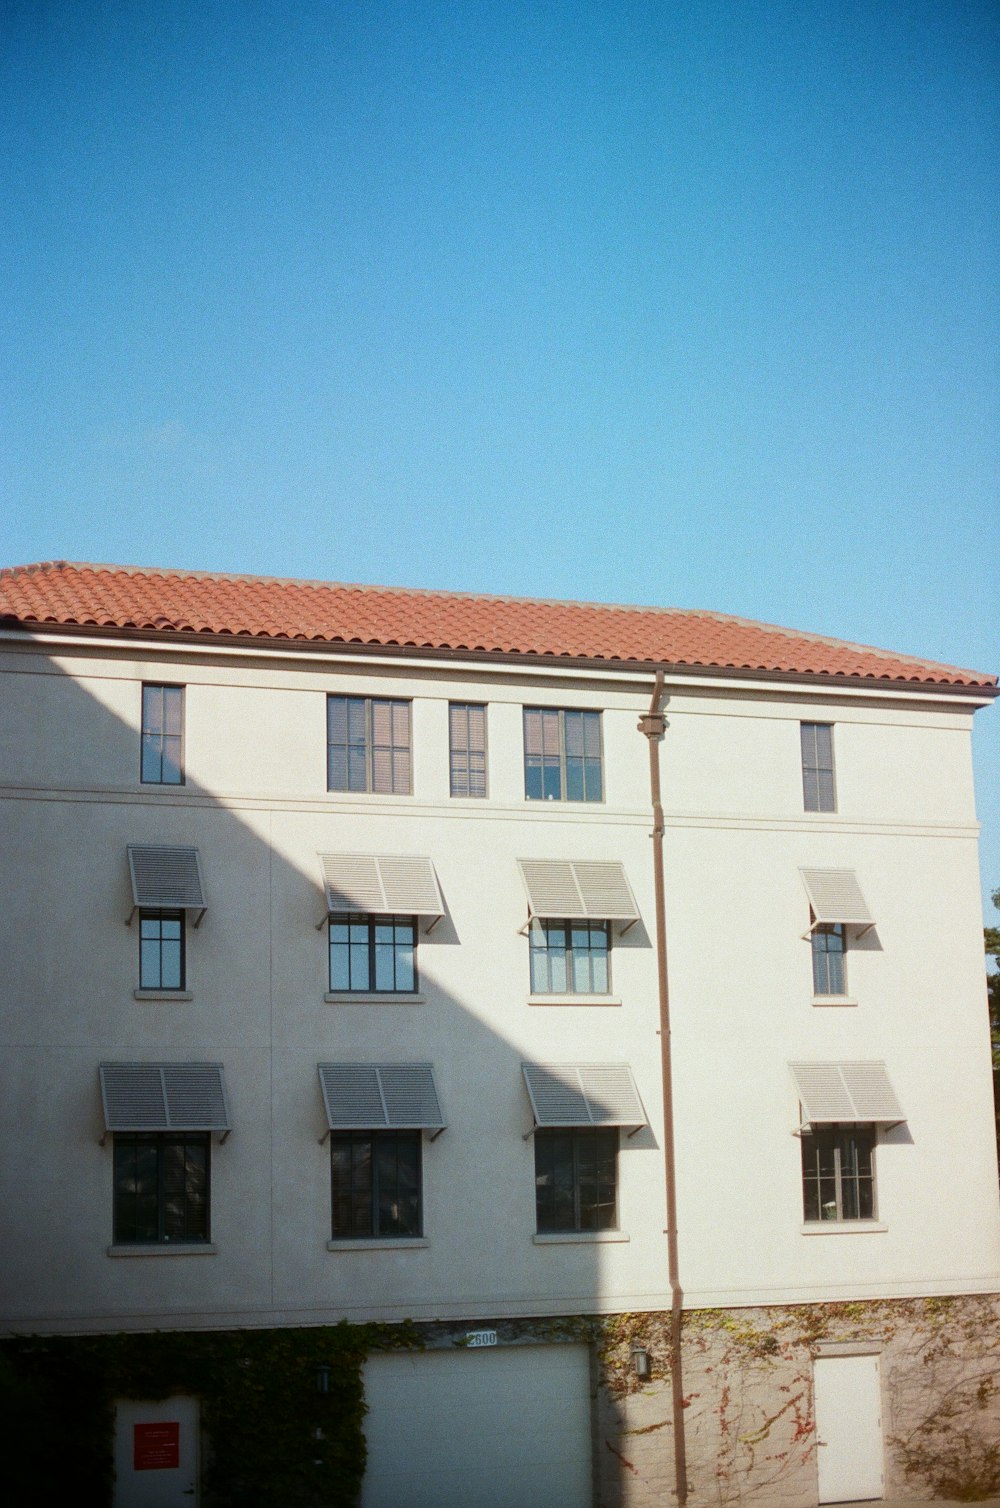 white and brown 4-storey building